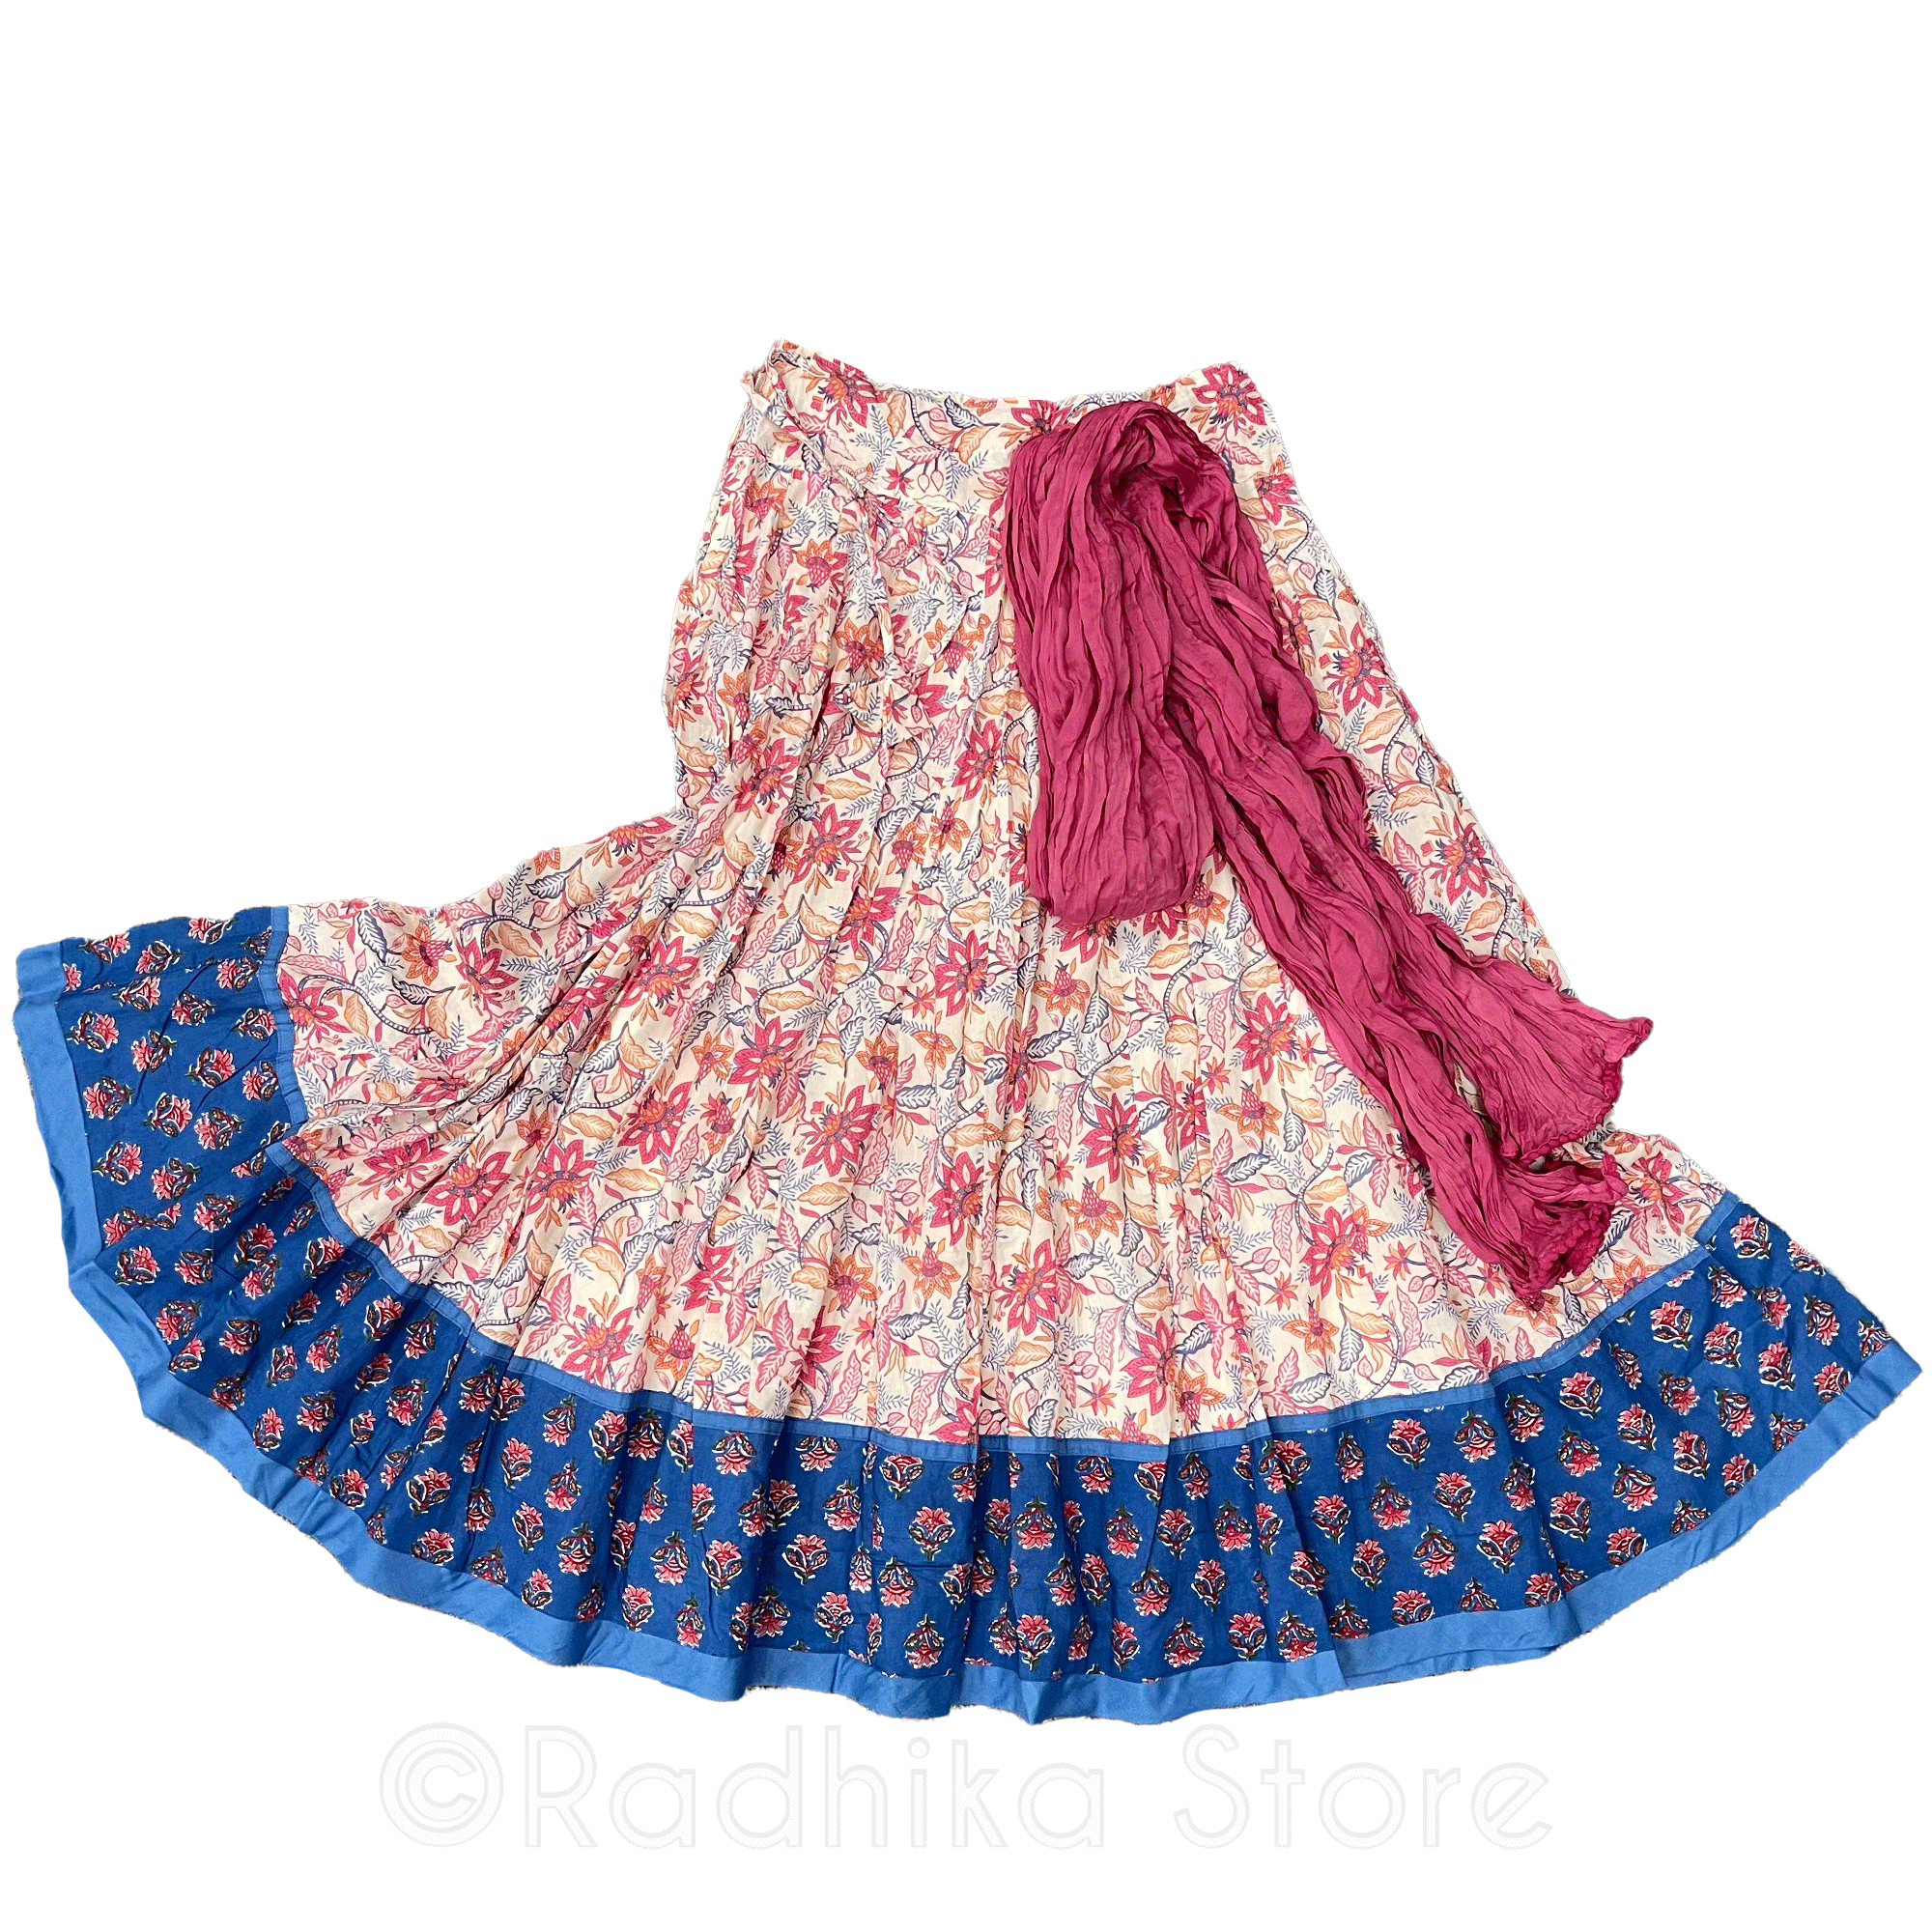 Ganga Lotus Flowers - Gopi Skirt - Coral Pinks and Water Blue - Cotton Screen Print - With Chadar - S-M-L